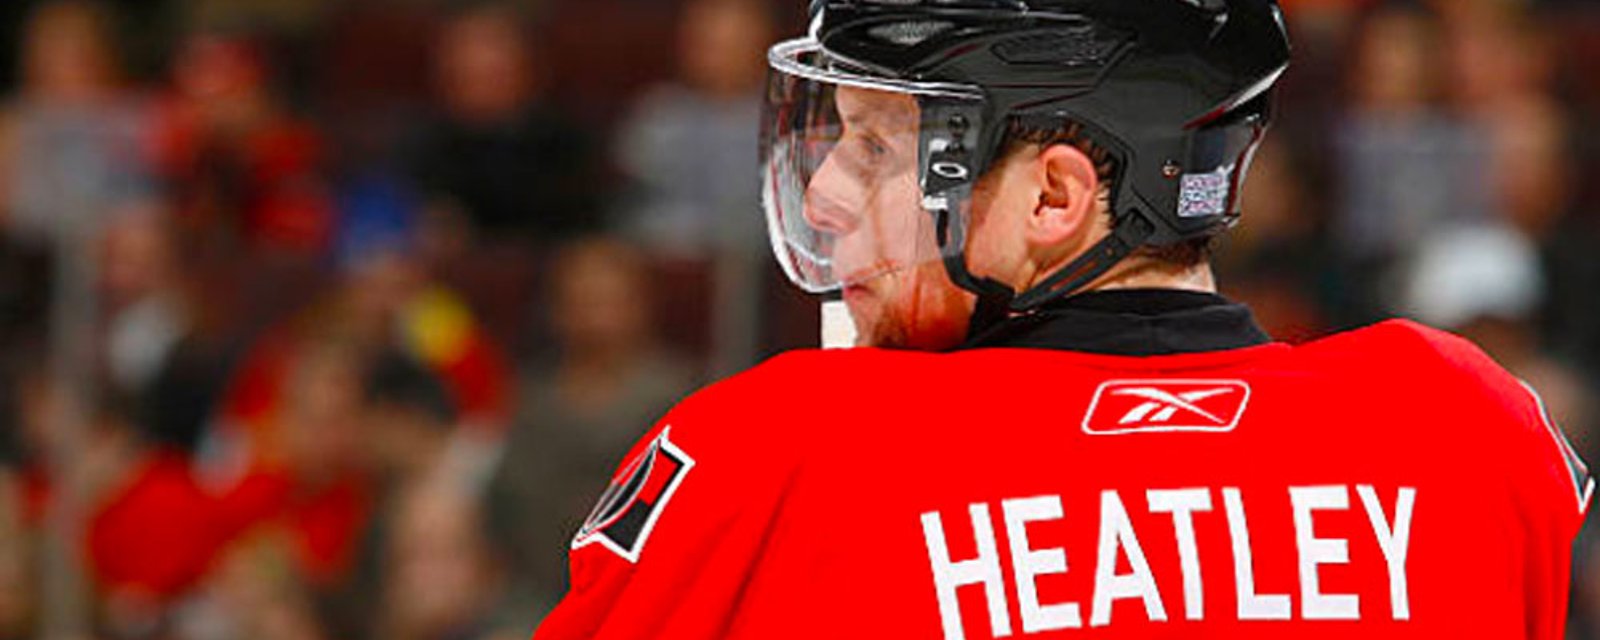 Dany Heatley is back in the NHL!